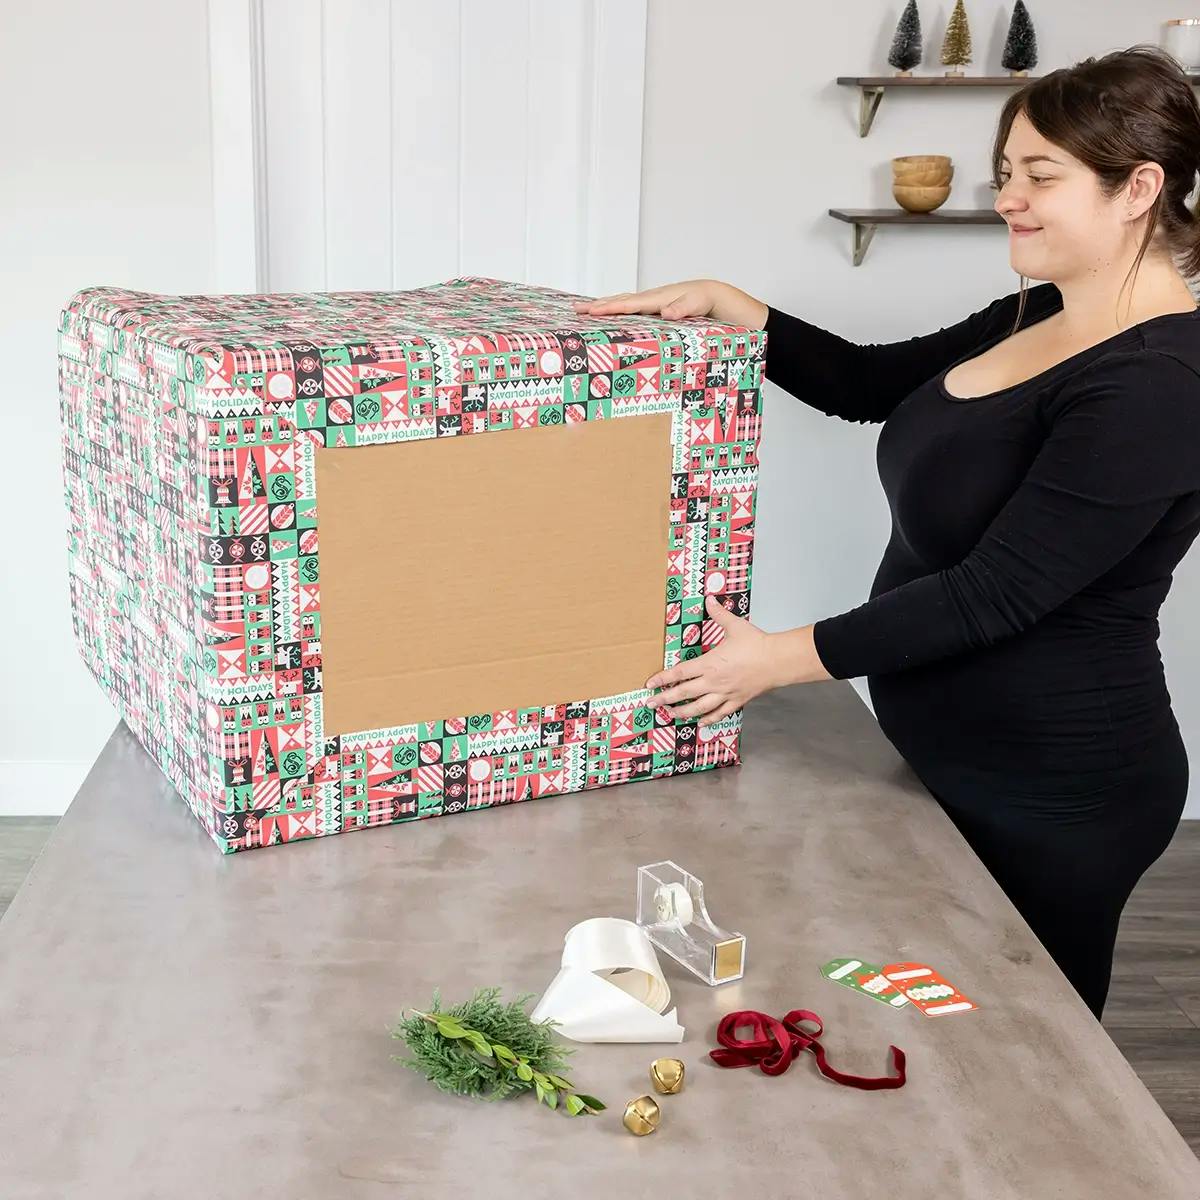 Folding wrapping paper over the ends of a large box.